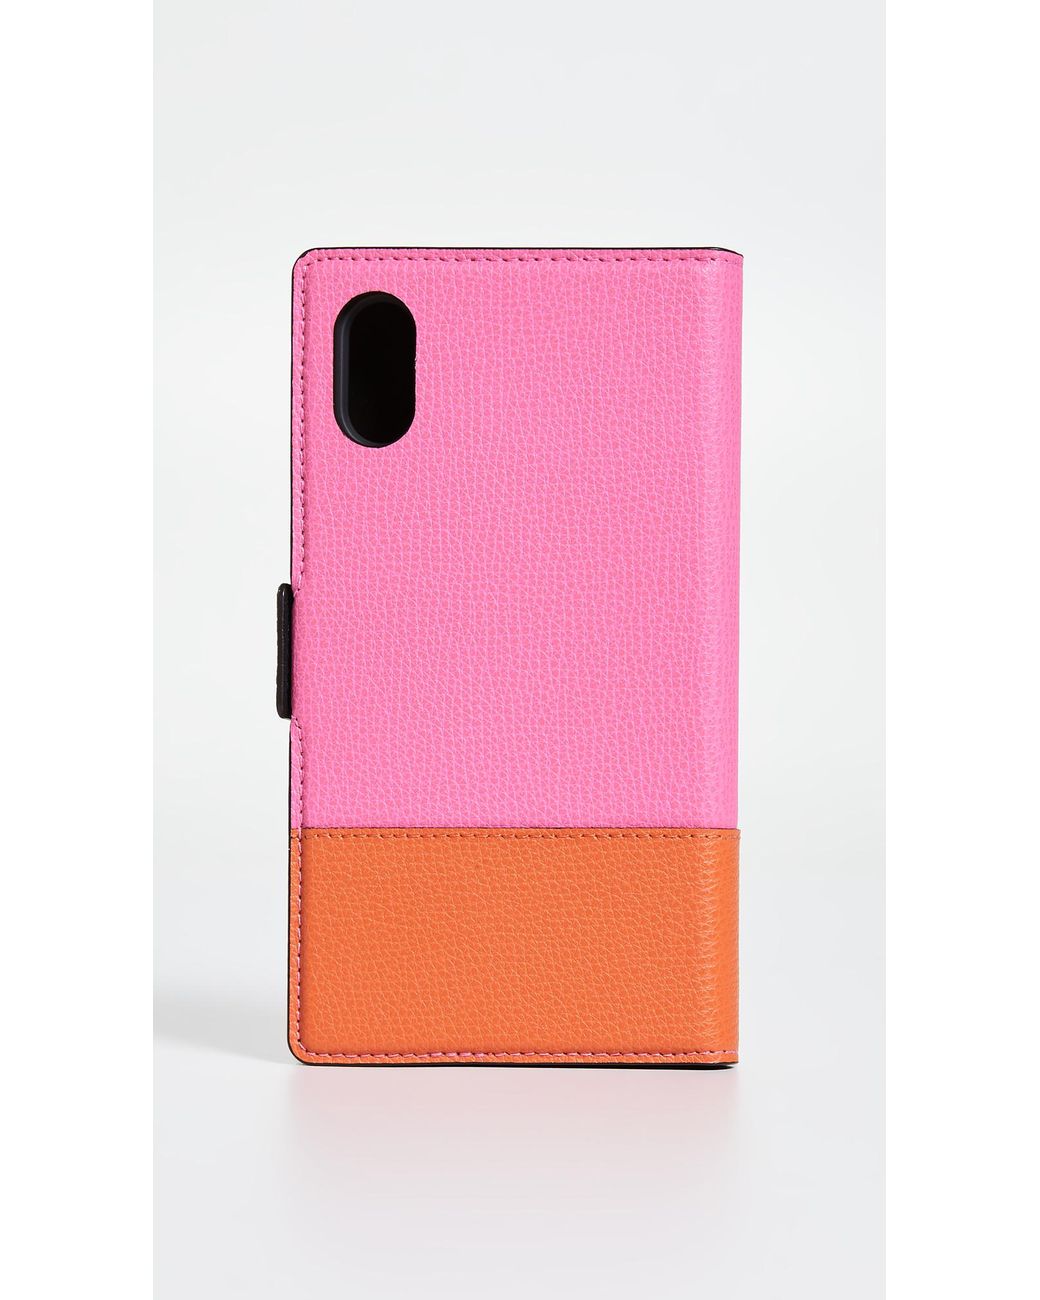 Kate Spade Sylvia Magnetic Folio Iphone Case in Pink | Lyst